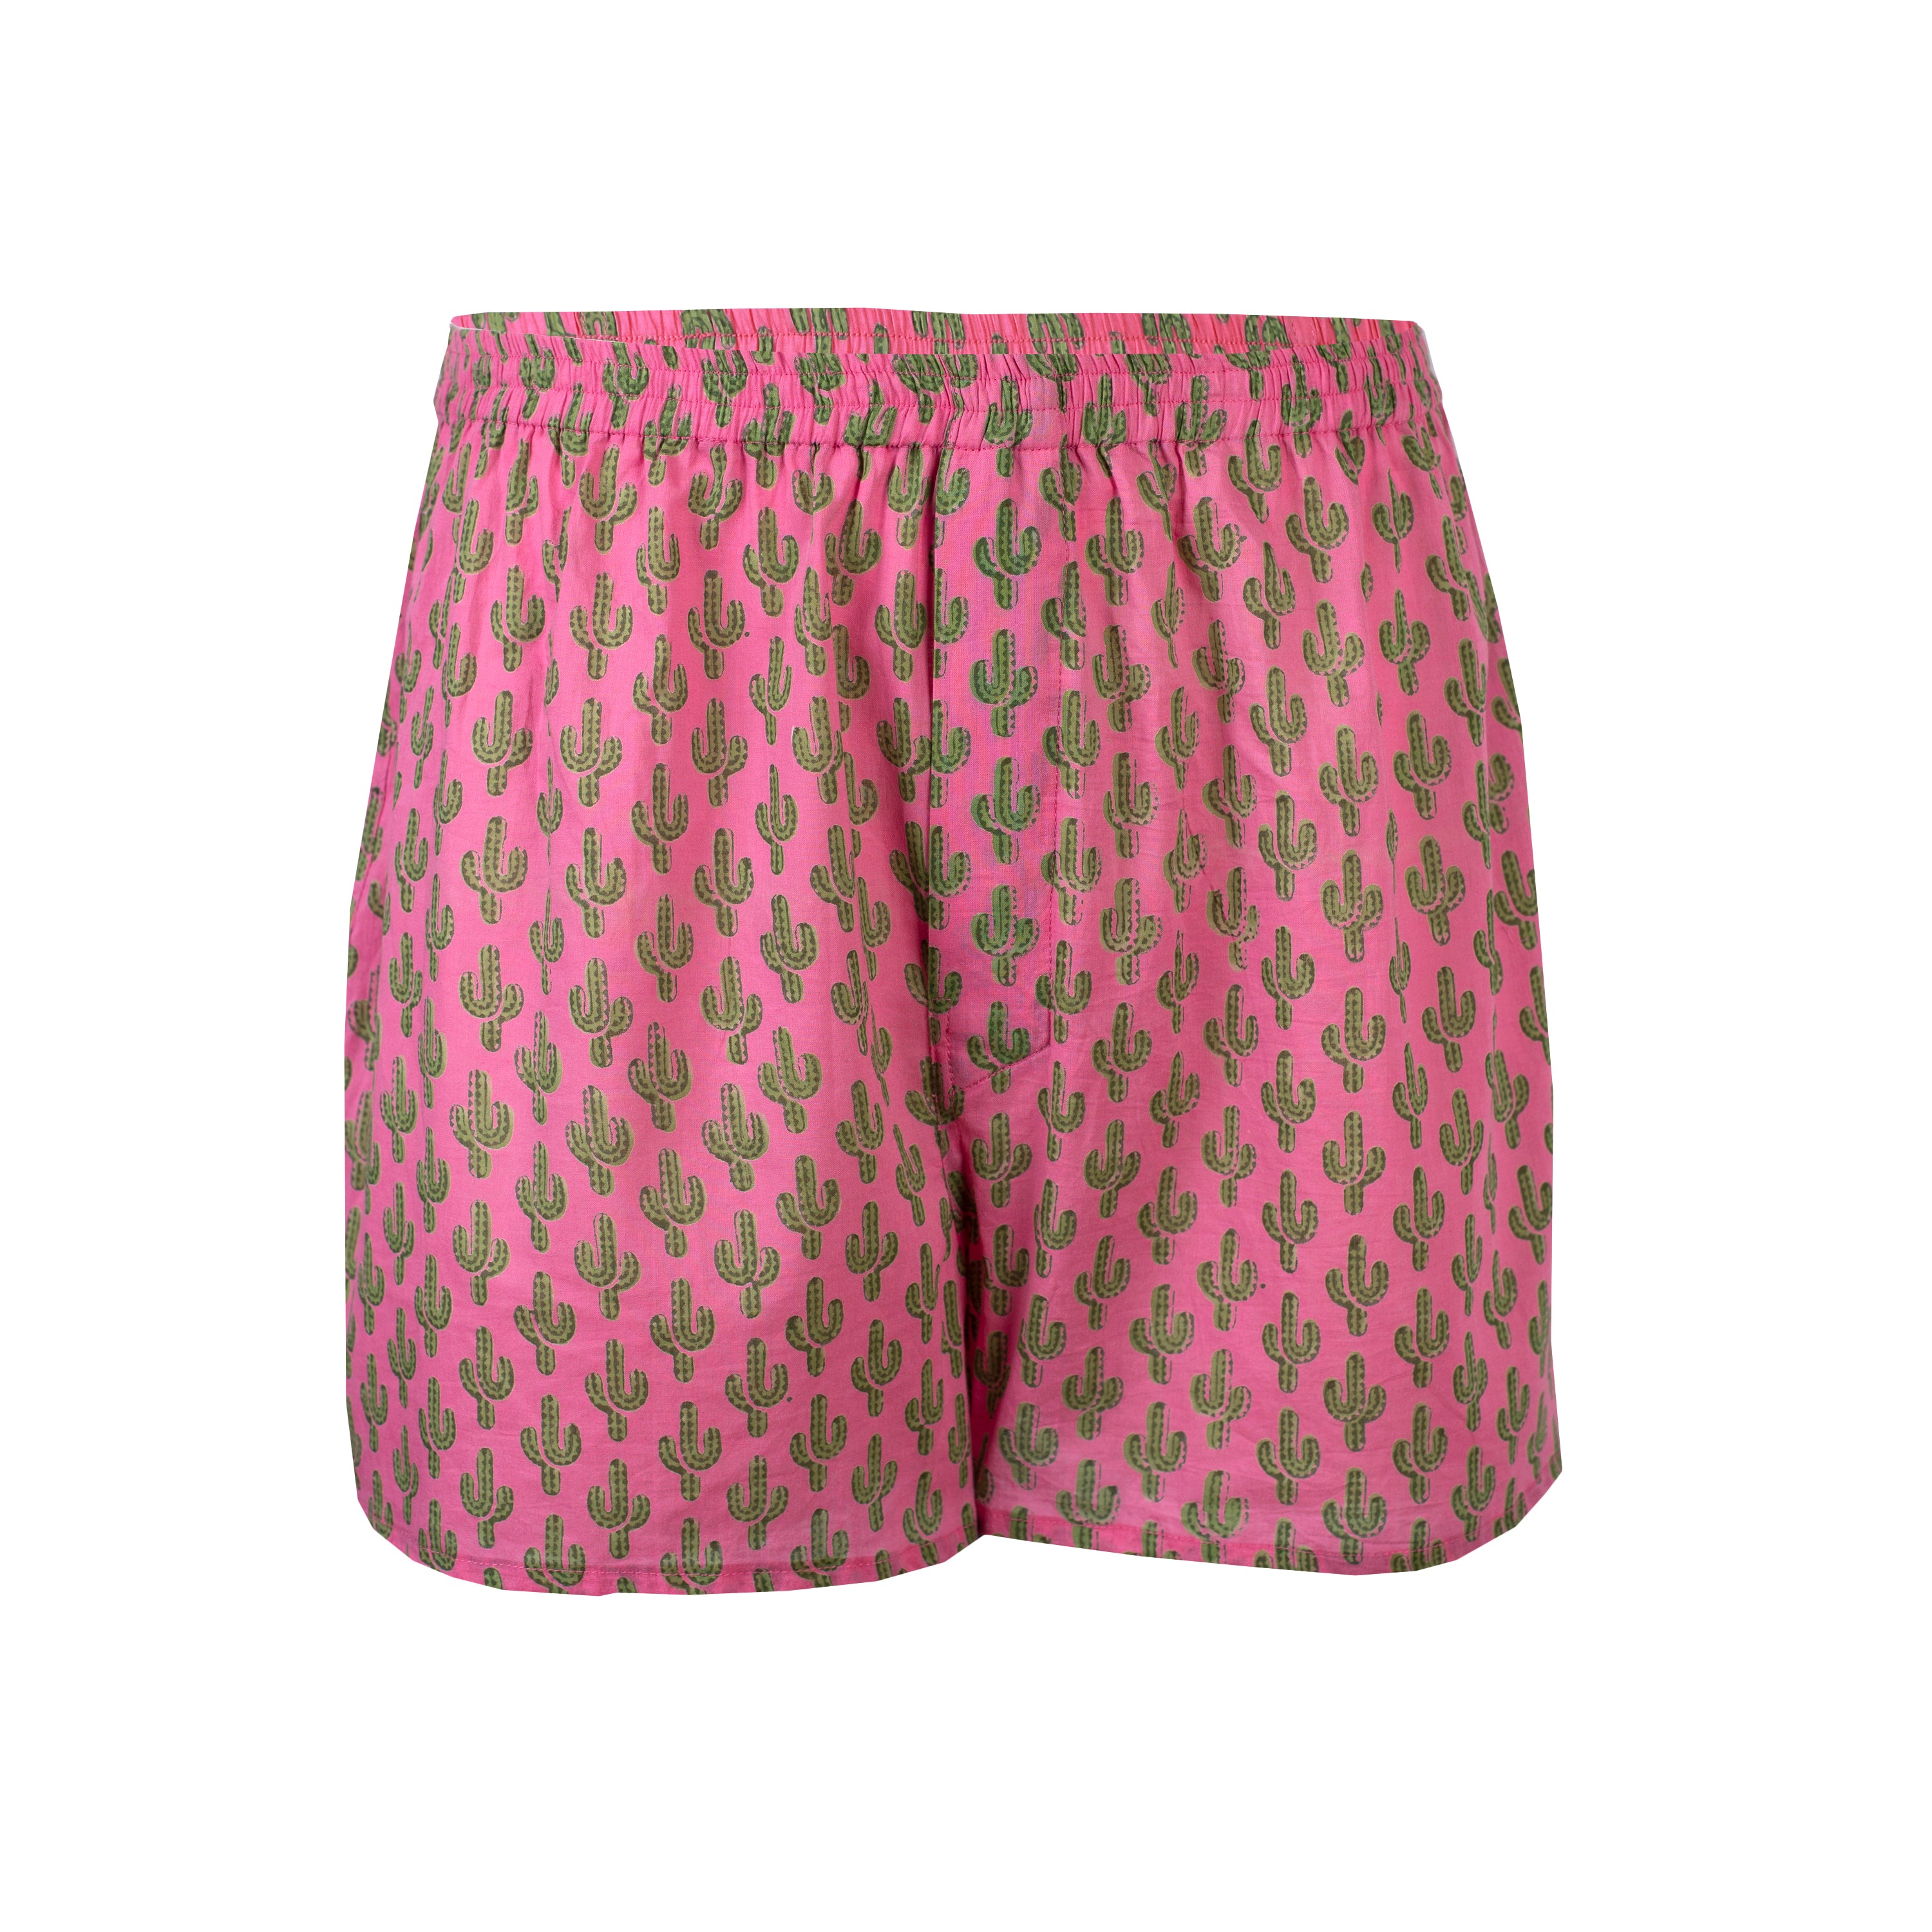 Pink Prickly Pax Cactus Boxers Shorts